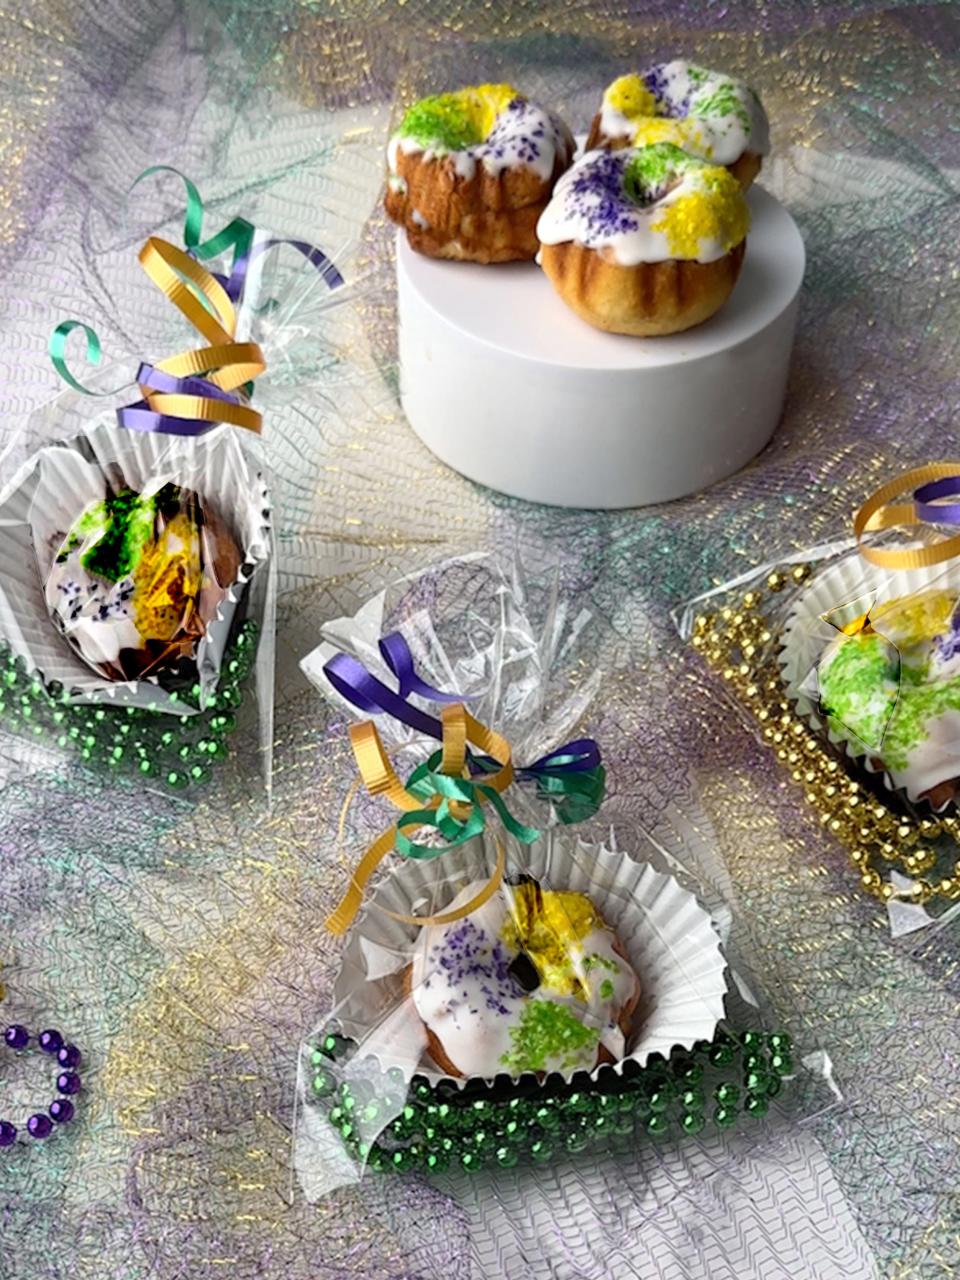 King Cake, a sweet pastry made with a rich buttery dough, is filled with sugar and cinnamon, topped with frosting, and finished with purple, green, and yellow sprinkles.